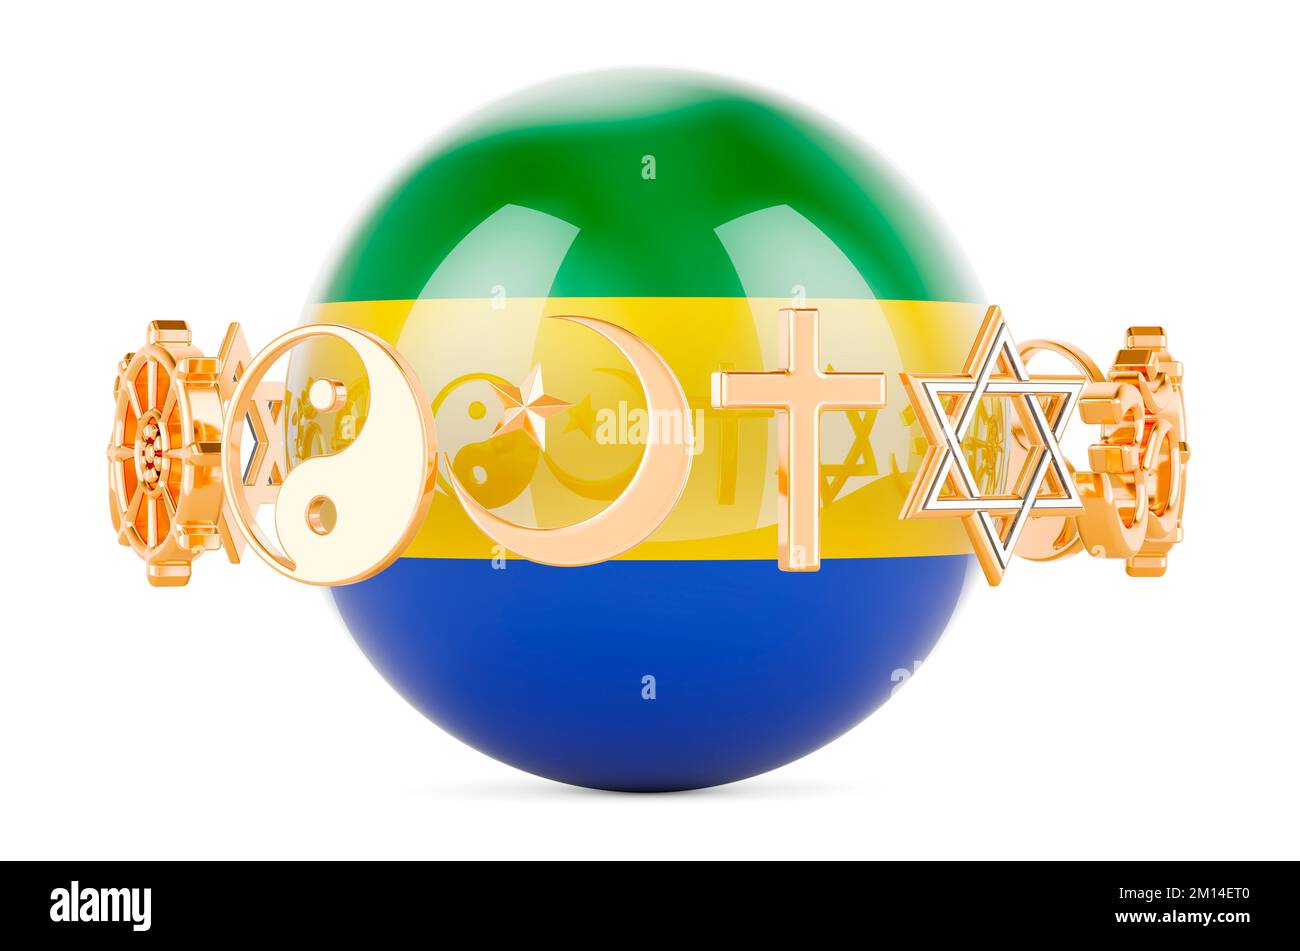 Gabonese flag painted on sphere with religions symbols around, 3D rendering isolated on white background Stock Photo